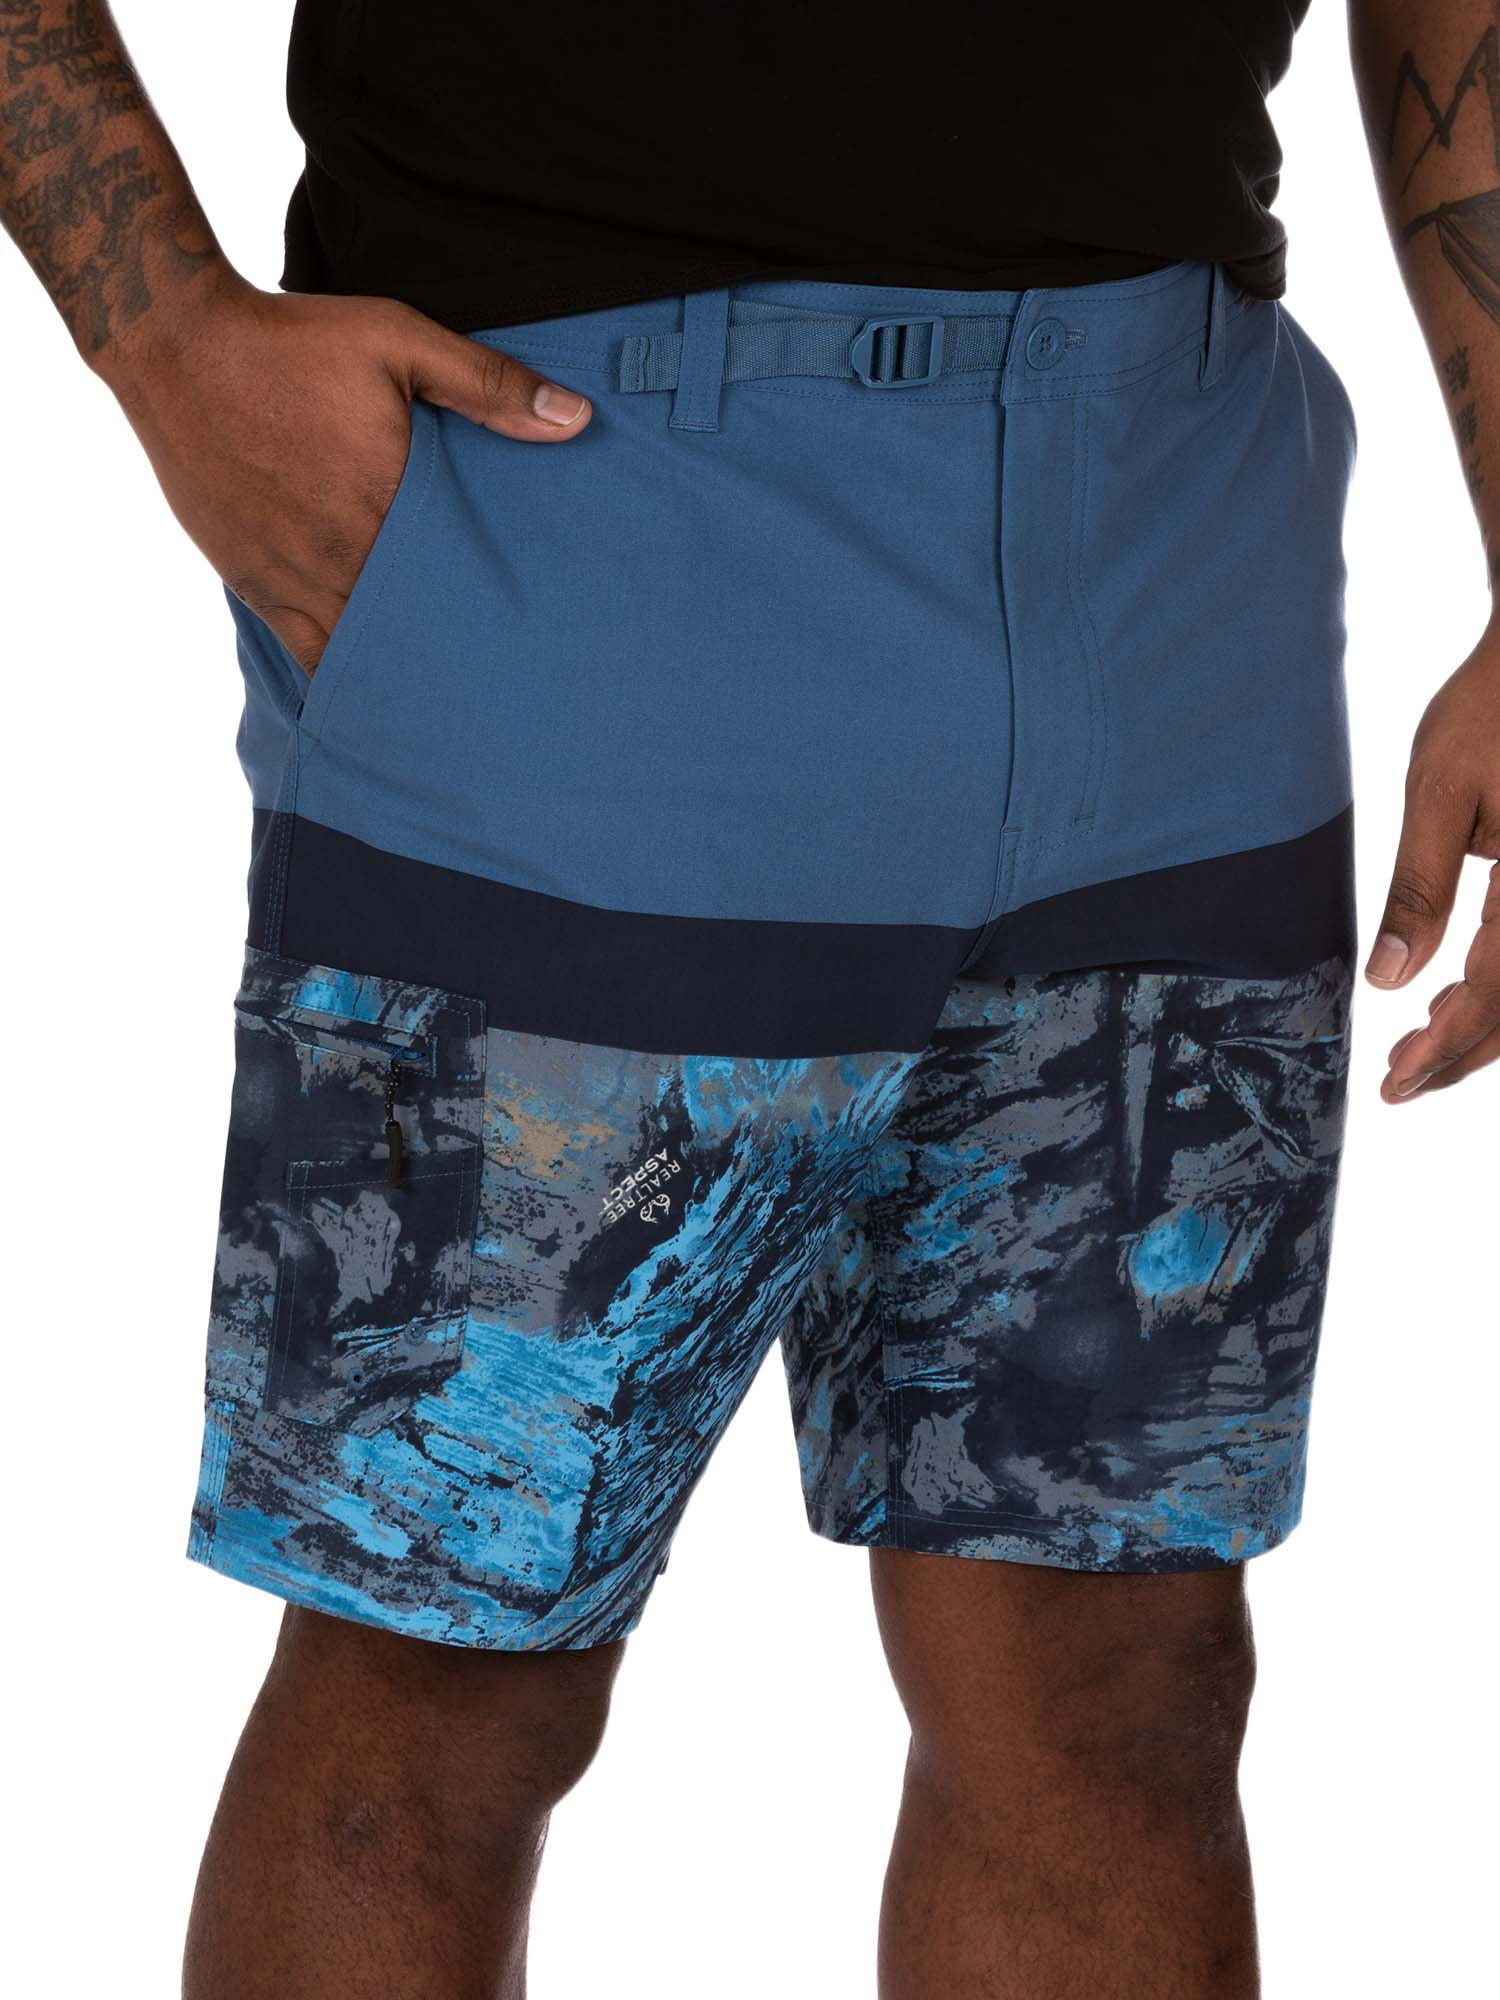 New Mens Large 36-38 Blue Woven Shorts Athletic Works Water Repellant 9" 